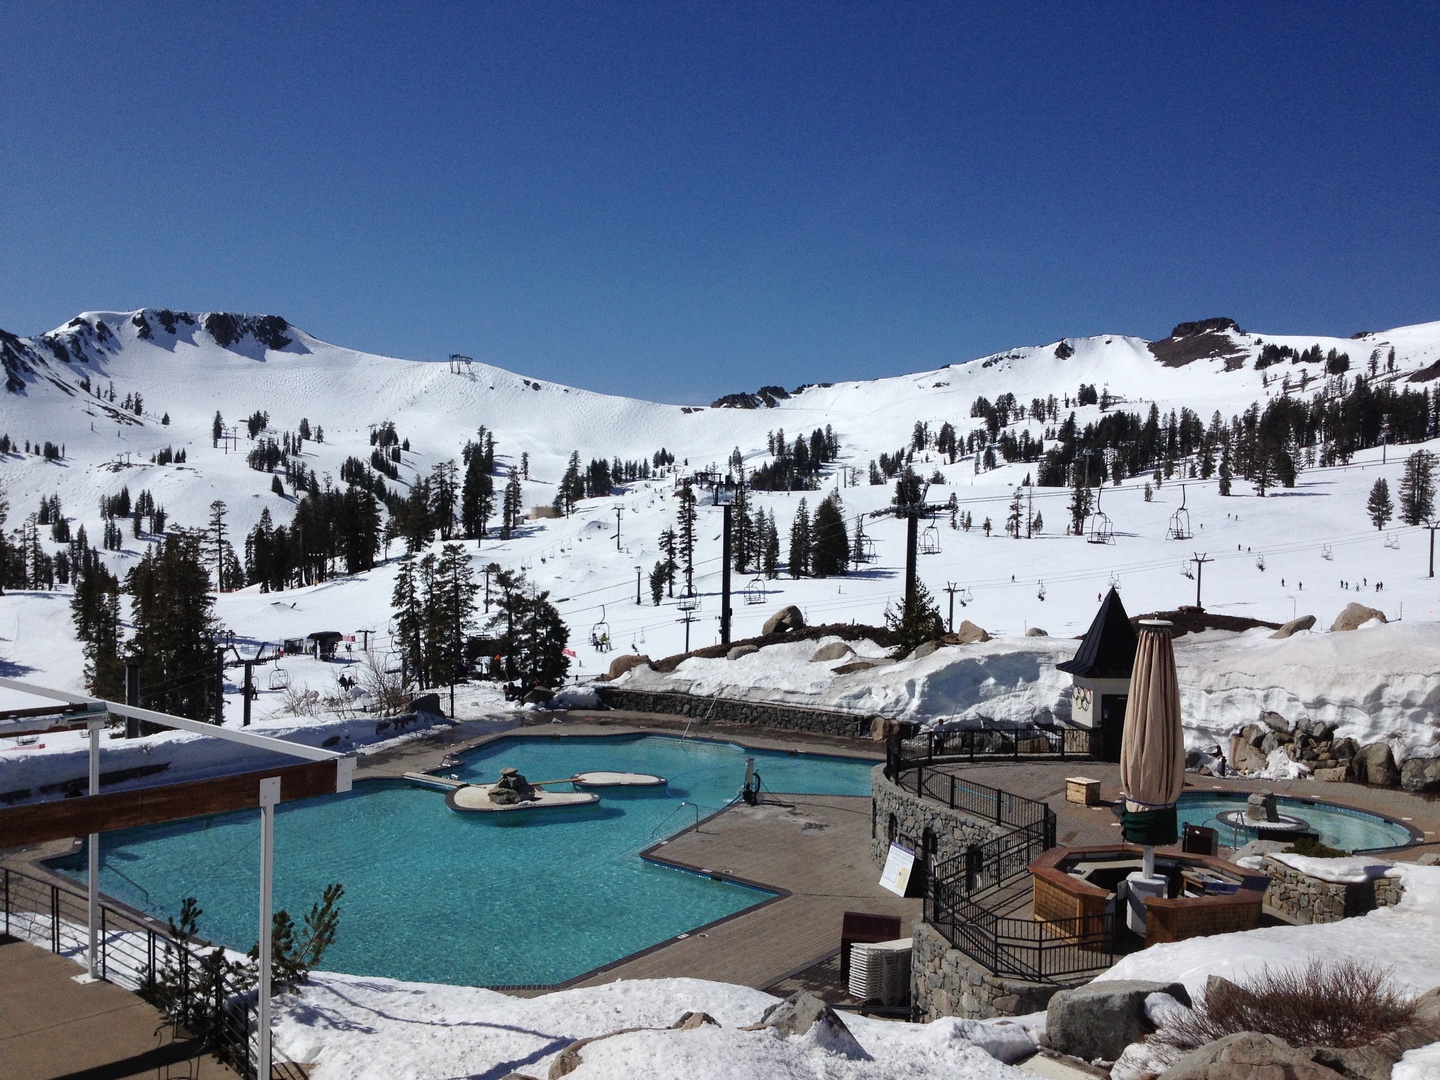 Squaw valley pool: Eagle's Nest Lodge